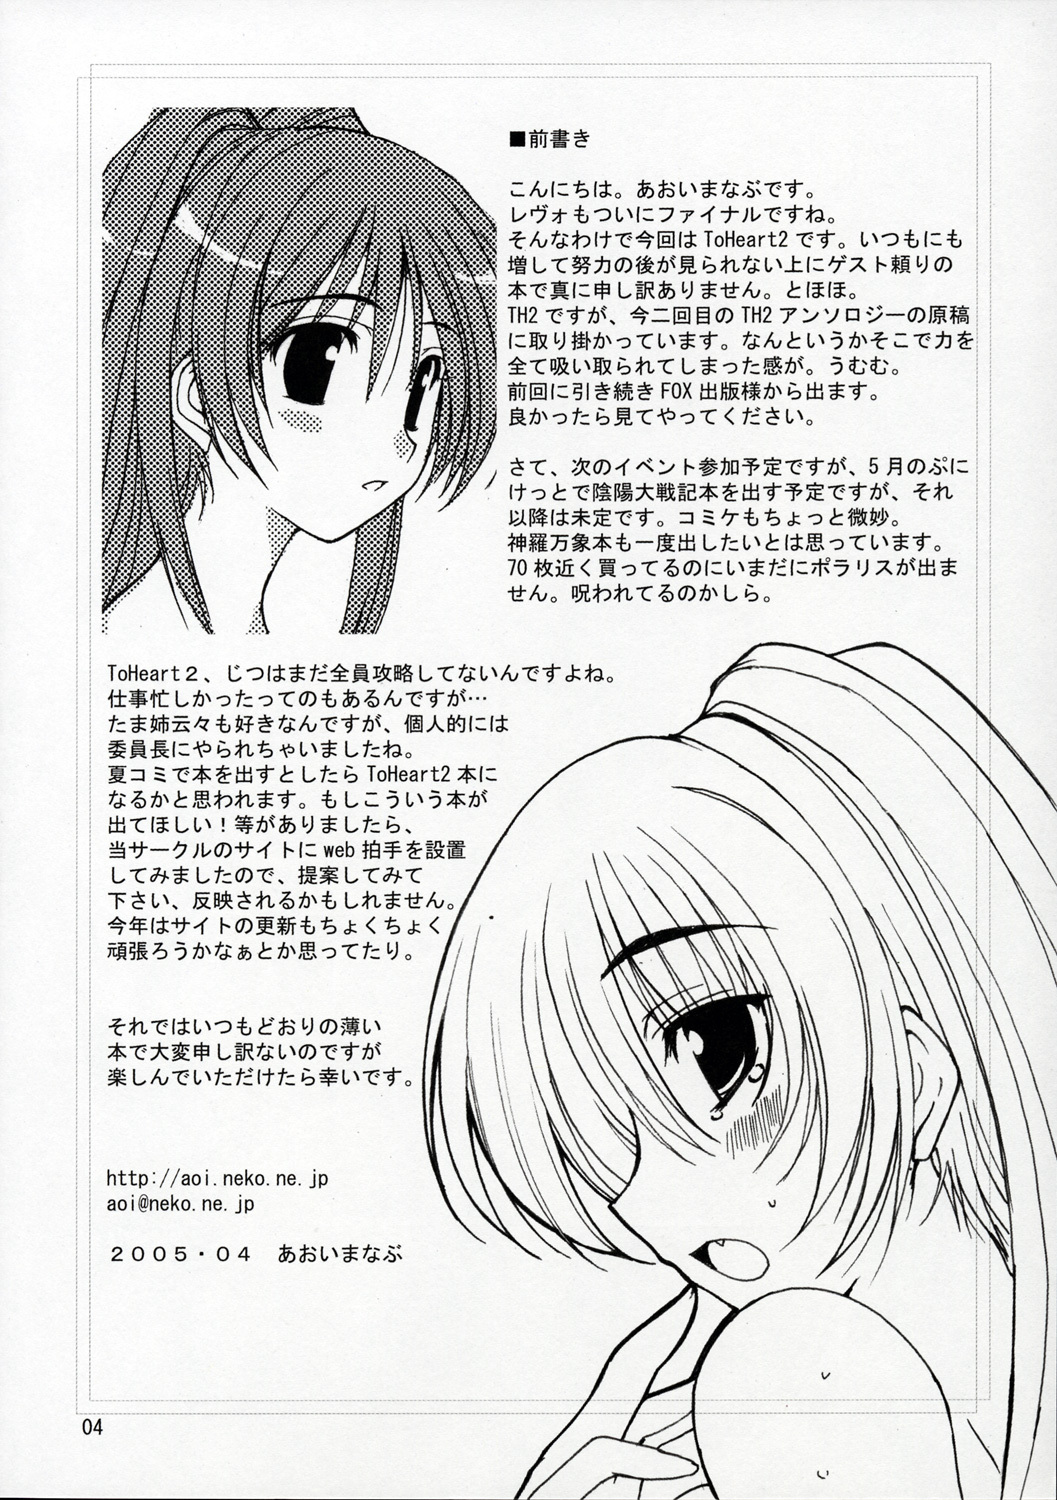 (CR37) [BlueMage (Aoi Manabu)] HEART IN BREAST (ToHeart2) page 3 full